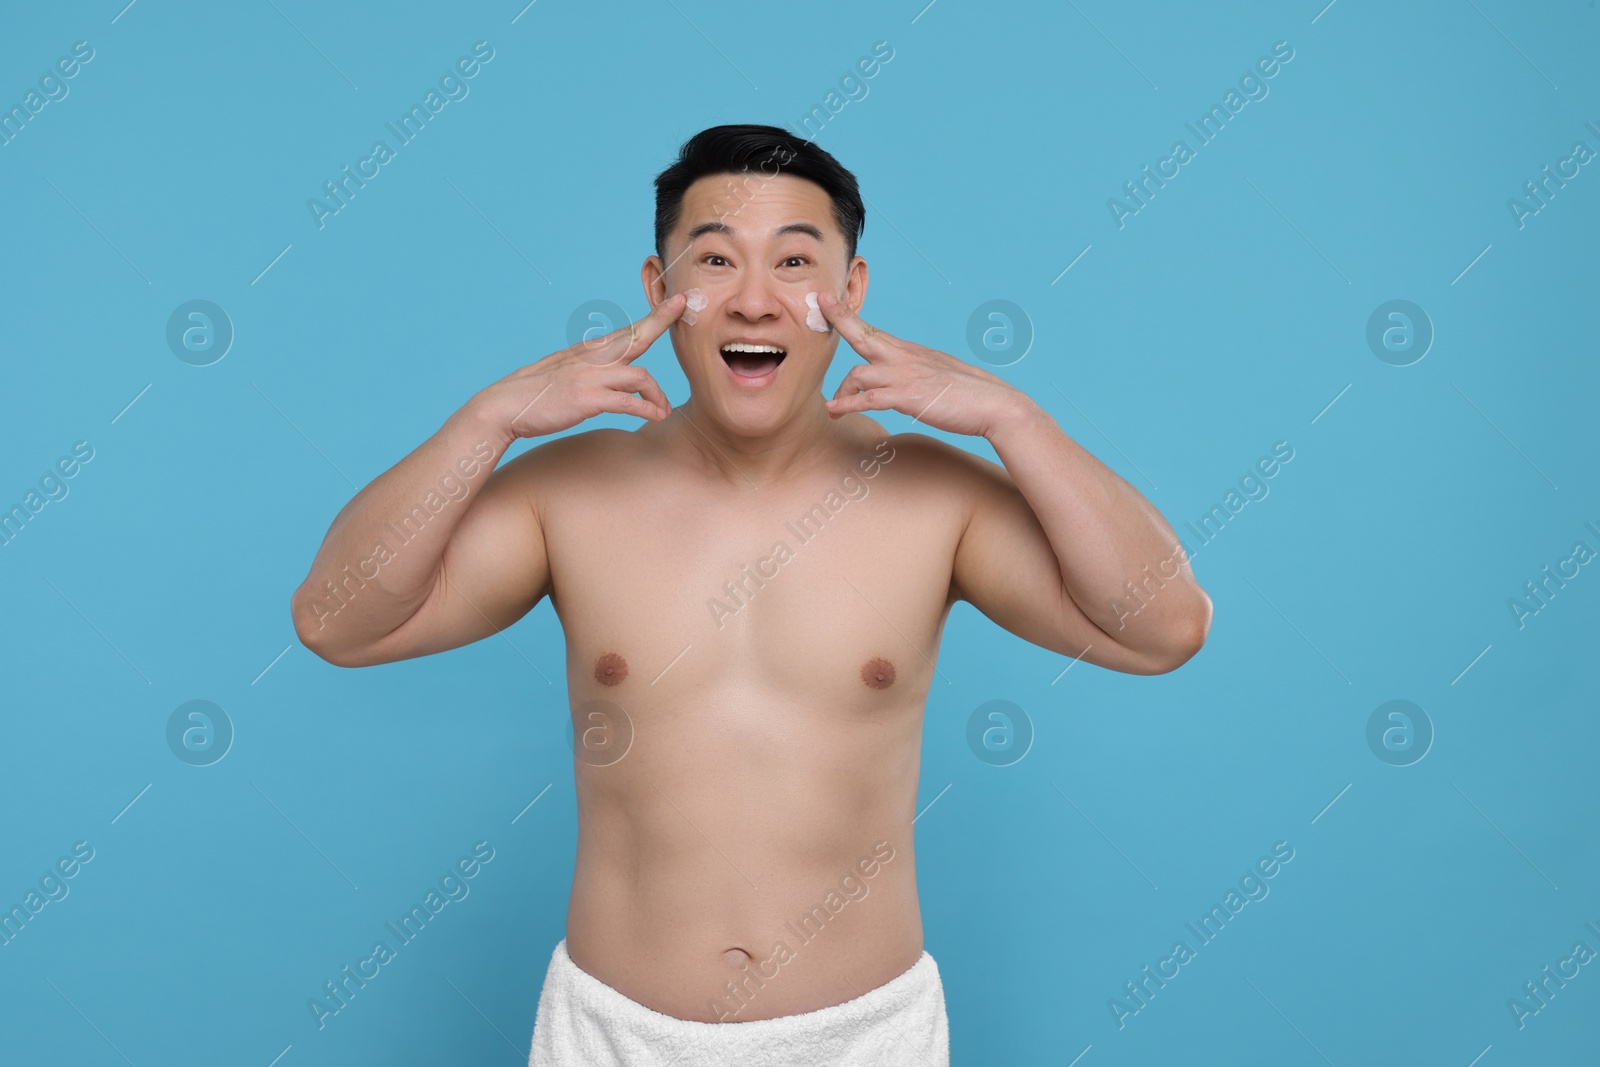 Photo of Emotional man applying cream onto his face on light blue background